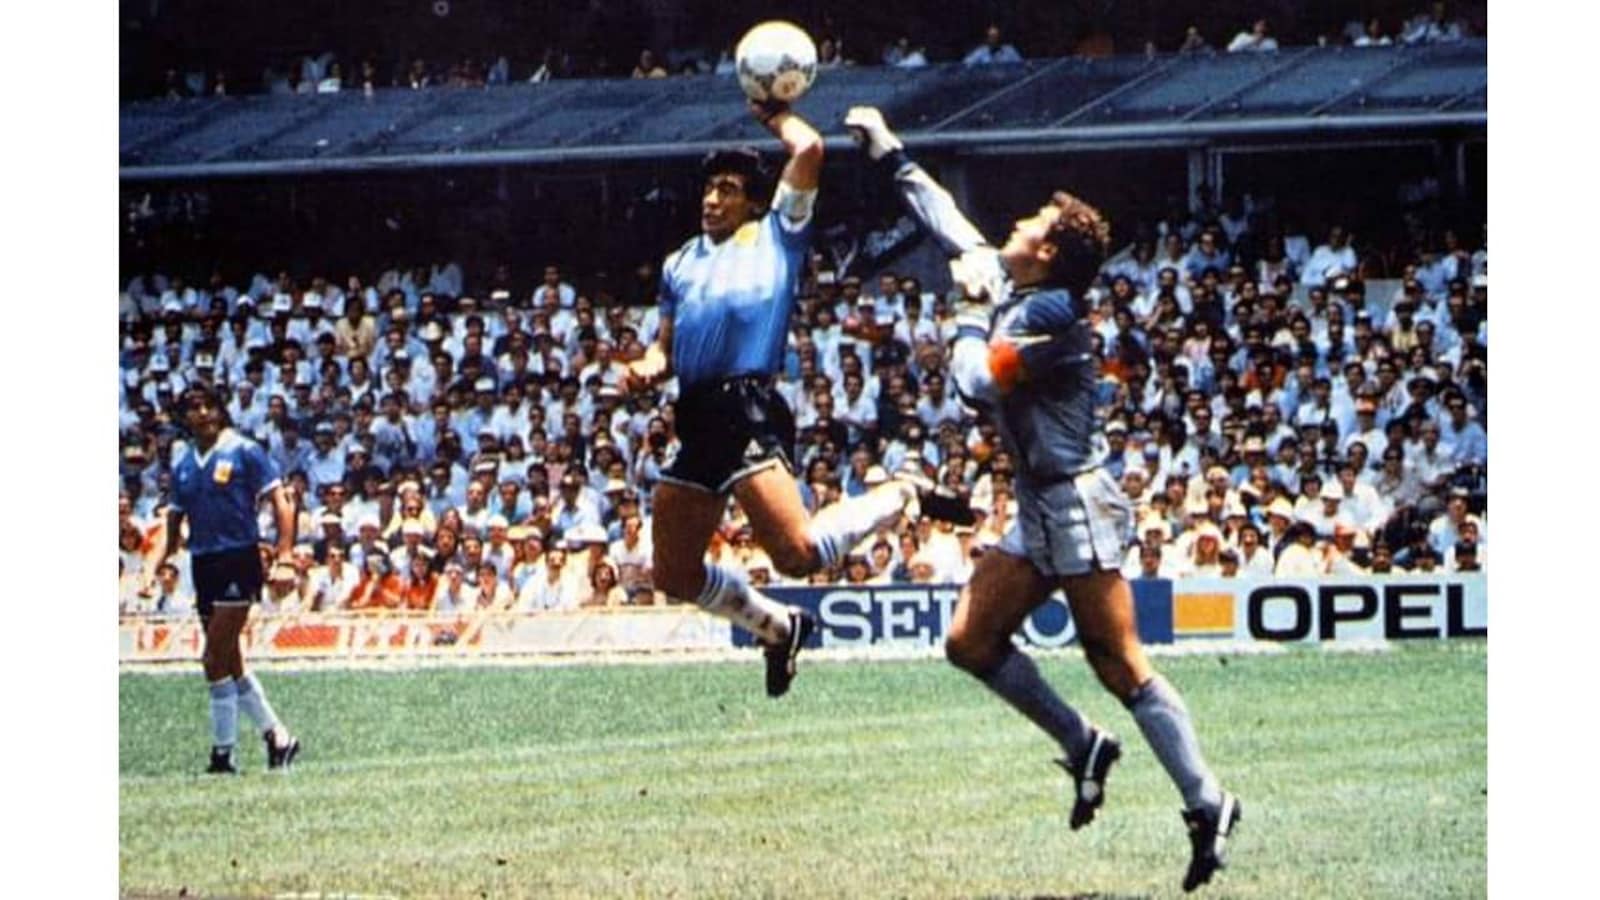 Why Maradona's 'Hand of God' goal is priceless — and unforgettable